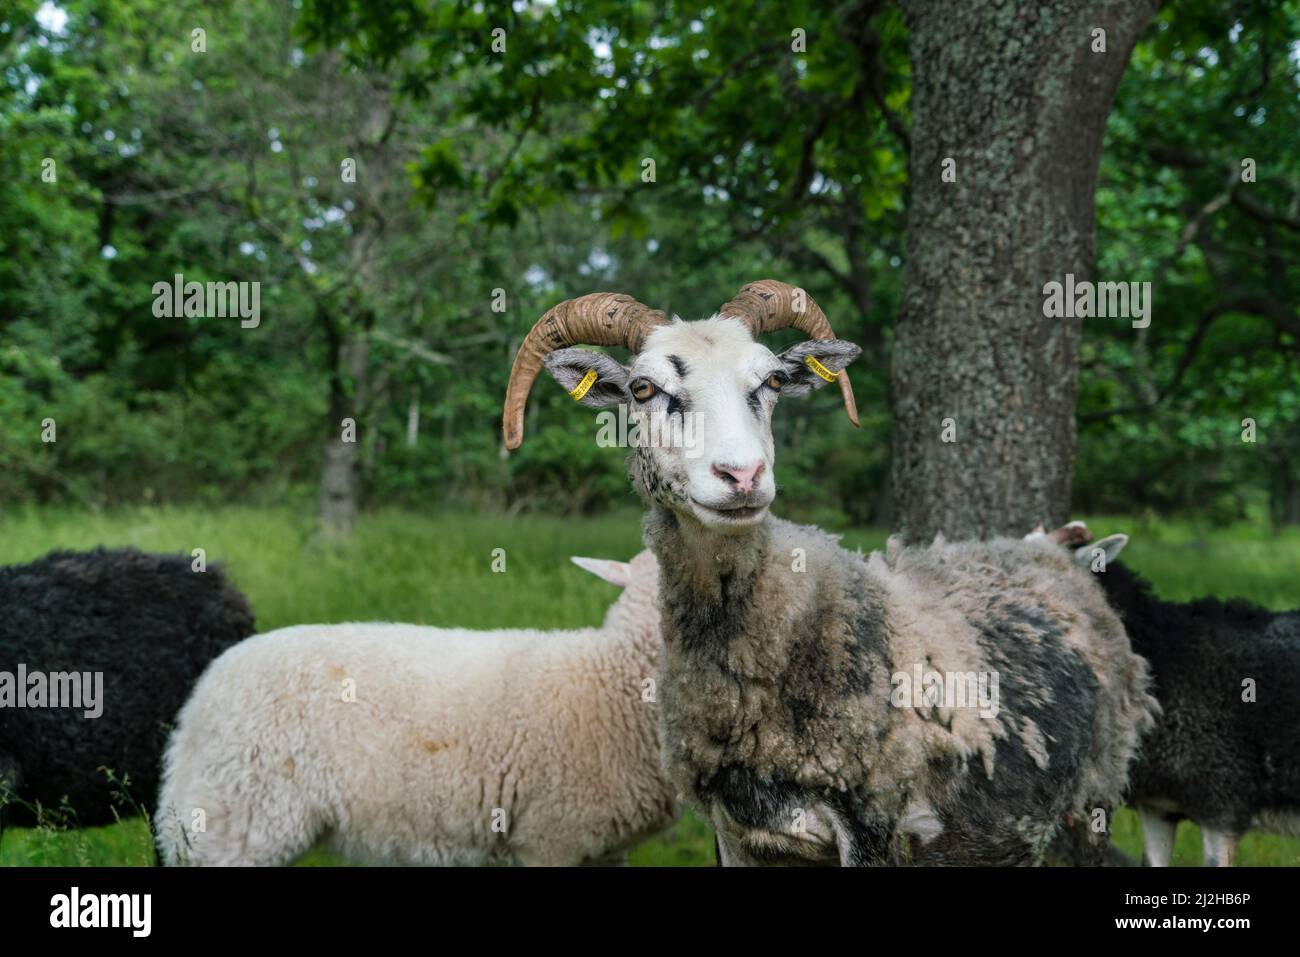 Flock of sheep in field Stock Photo